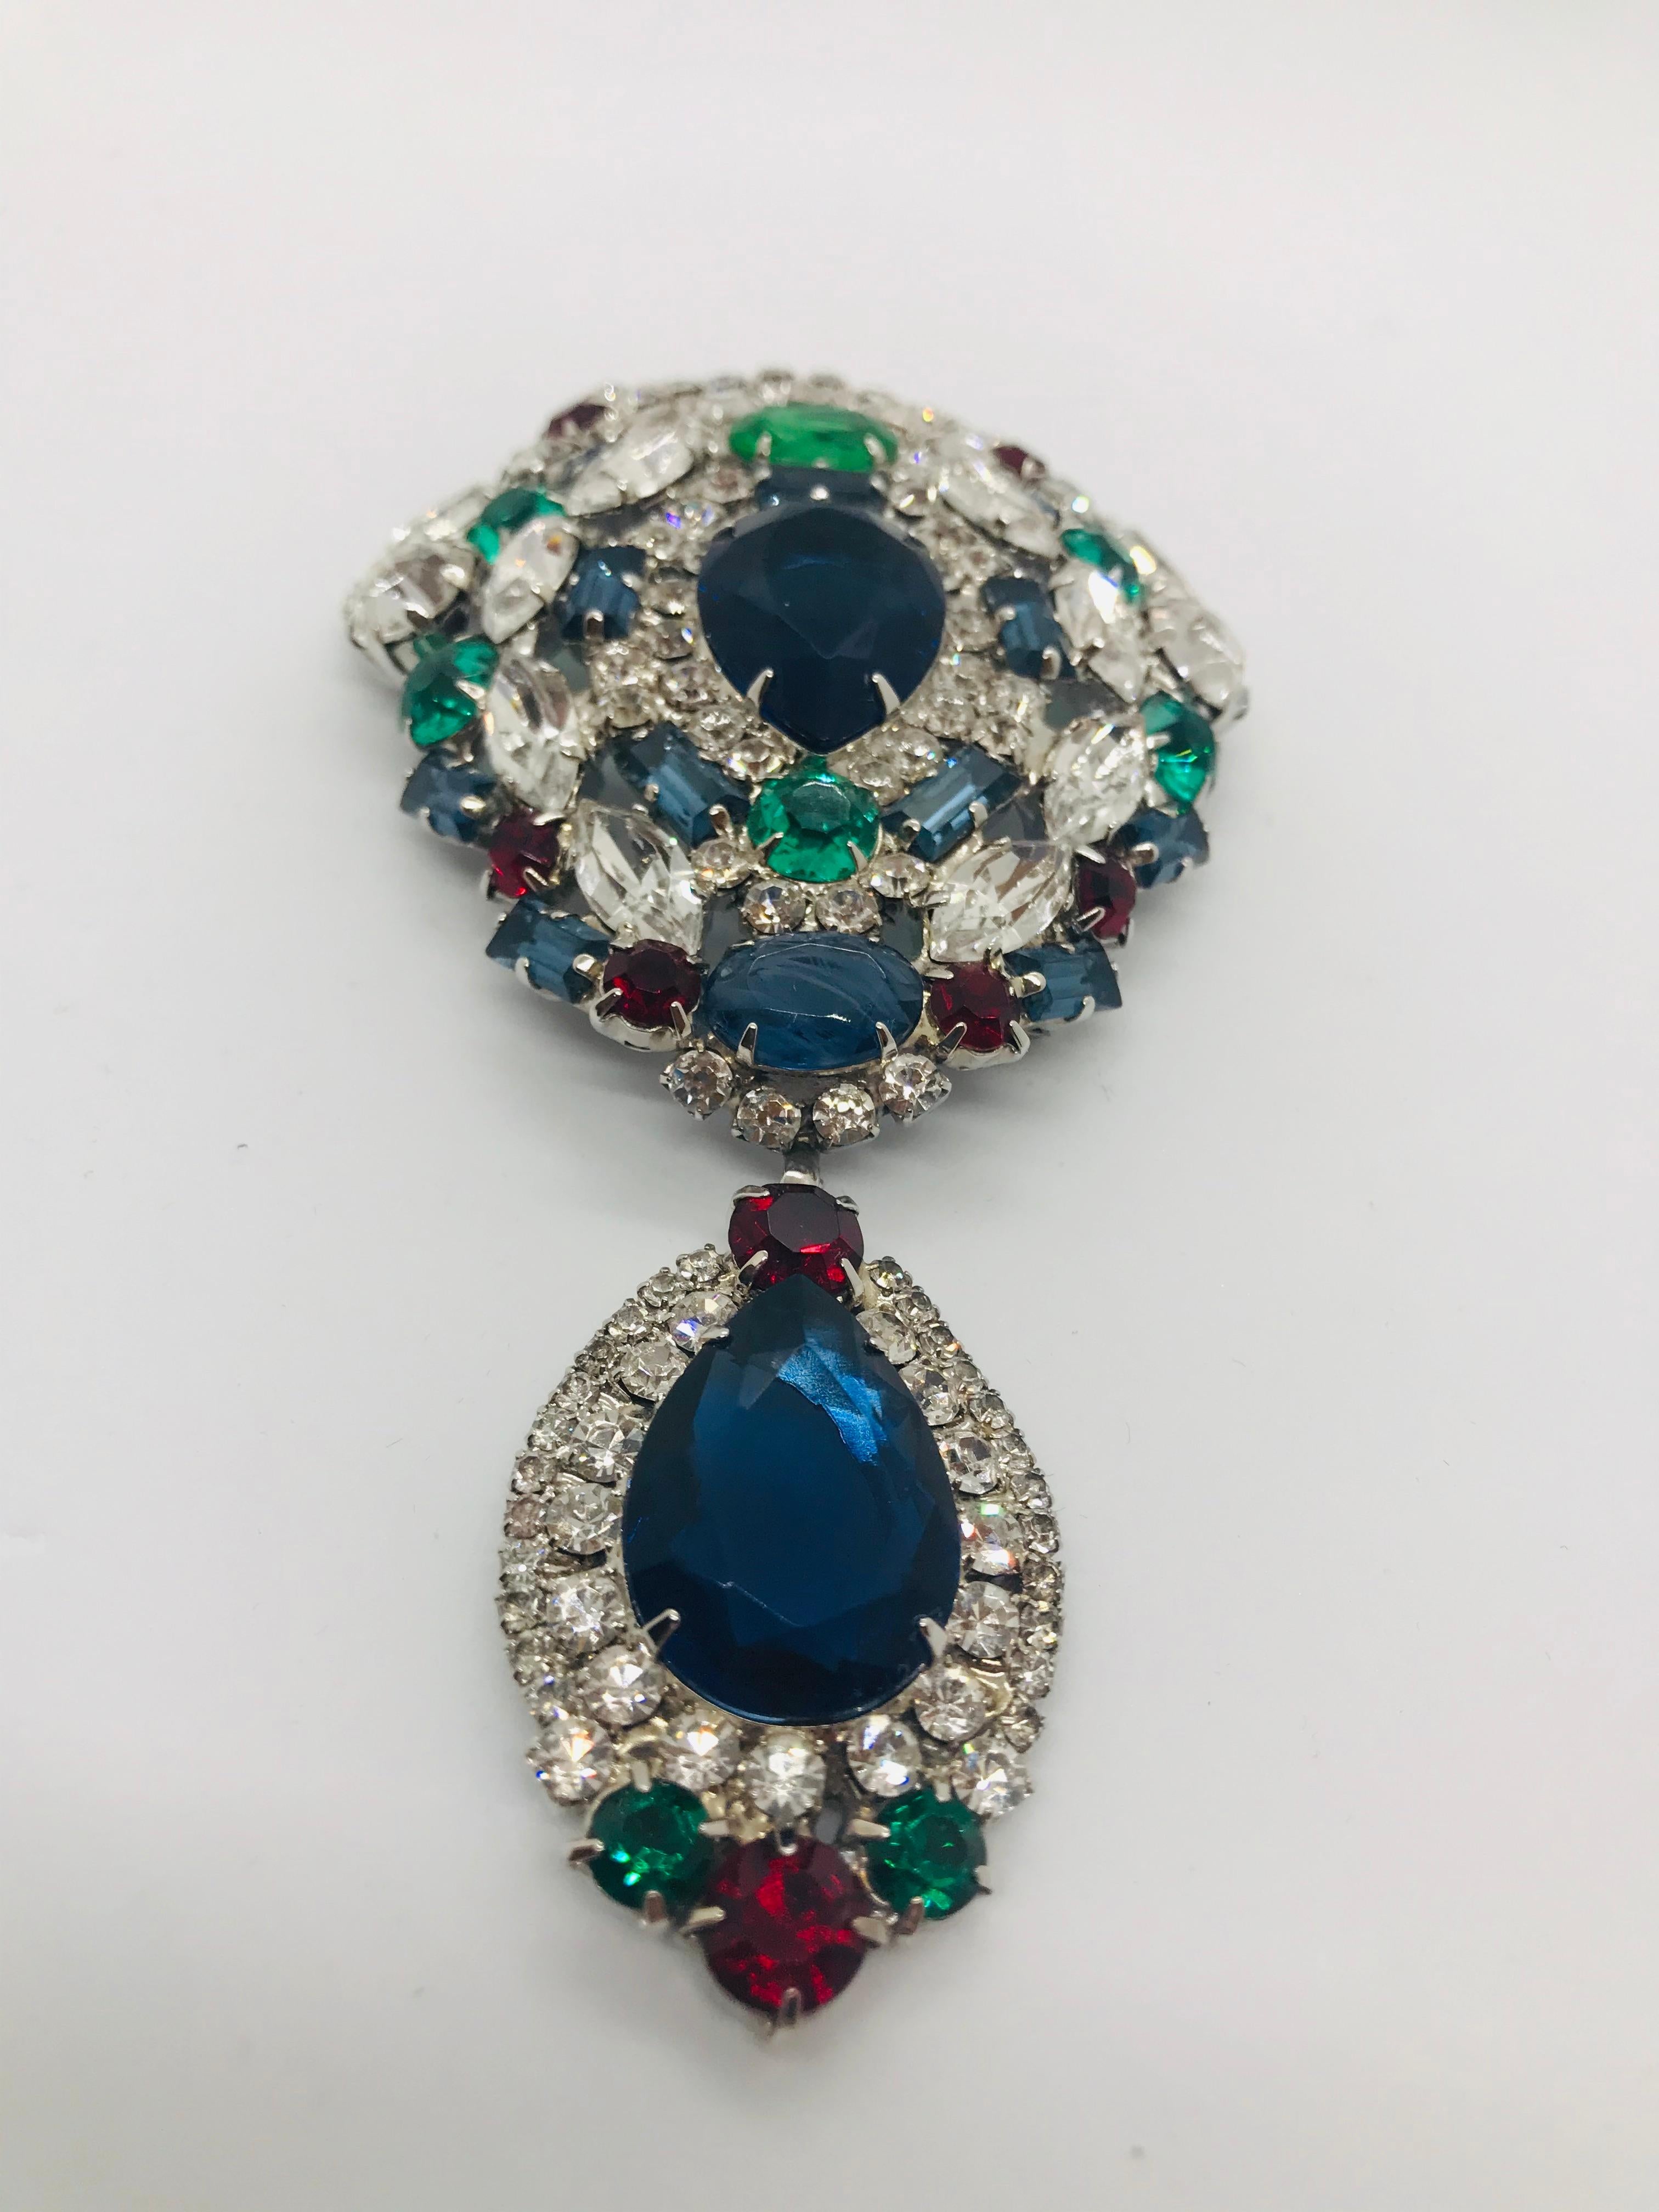 A tutti frutti brooch with a hanging pear shaped drop in clear ruby, emerald and sapphire Austrian crystal.  Created using rare vintage Austrian crystal stones from the 1950s and 1960s. It has a distinct 